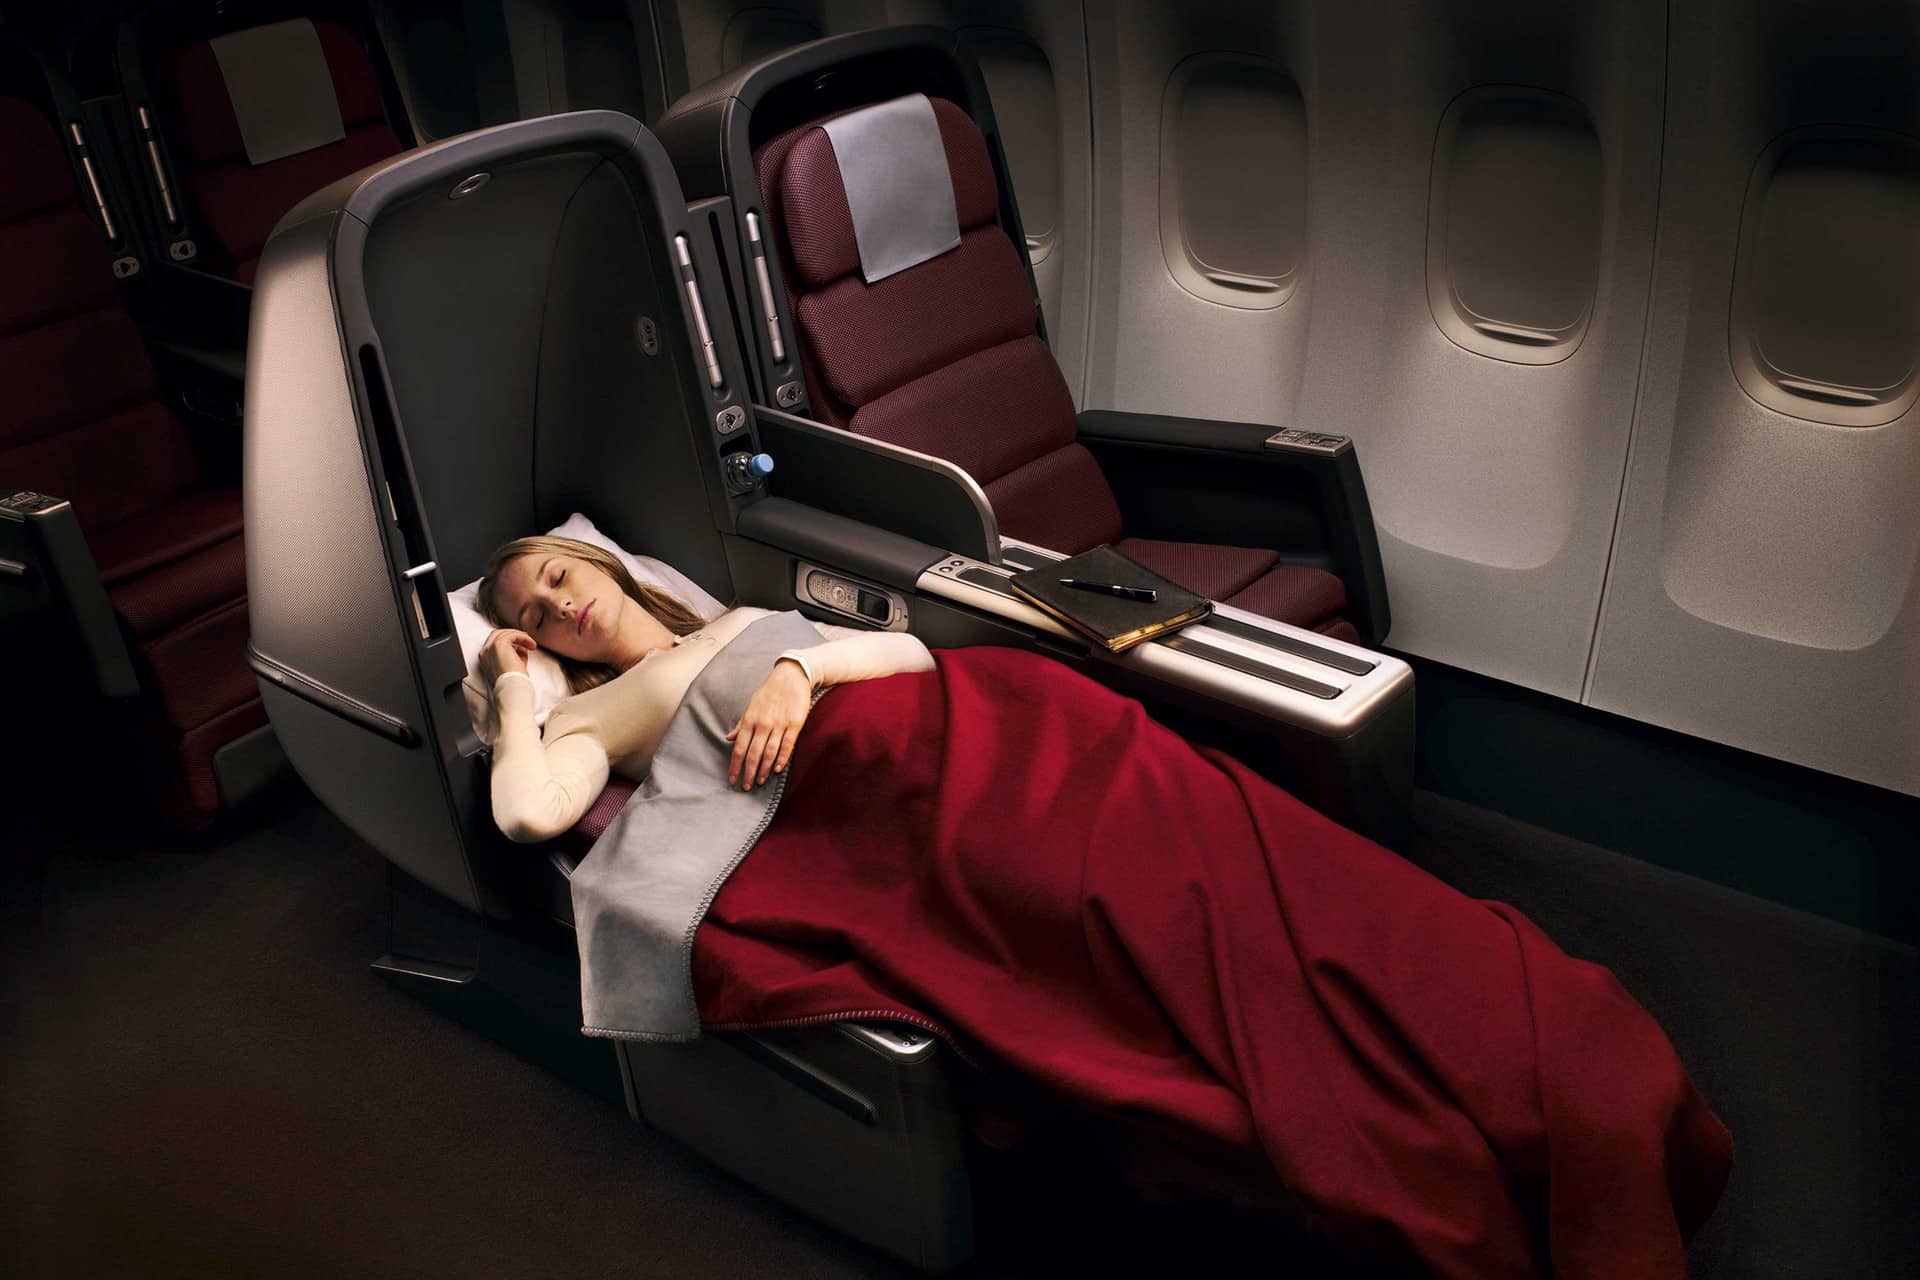 $25 Qantas Initiative A Godsend For Business Class Travellers Suffering FOMO